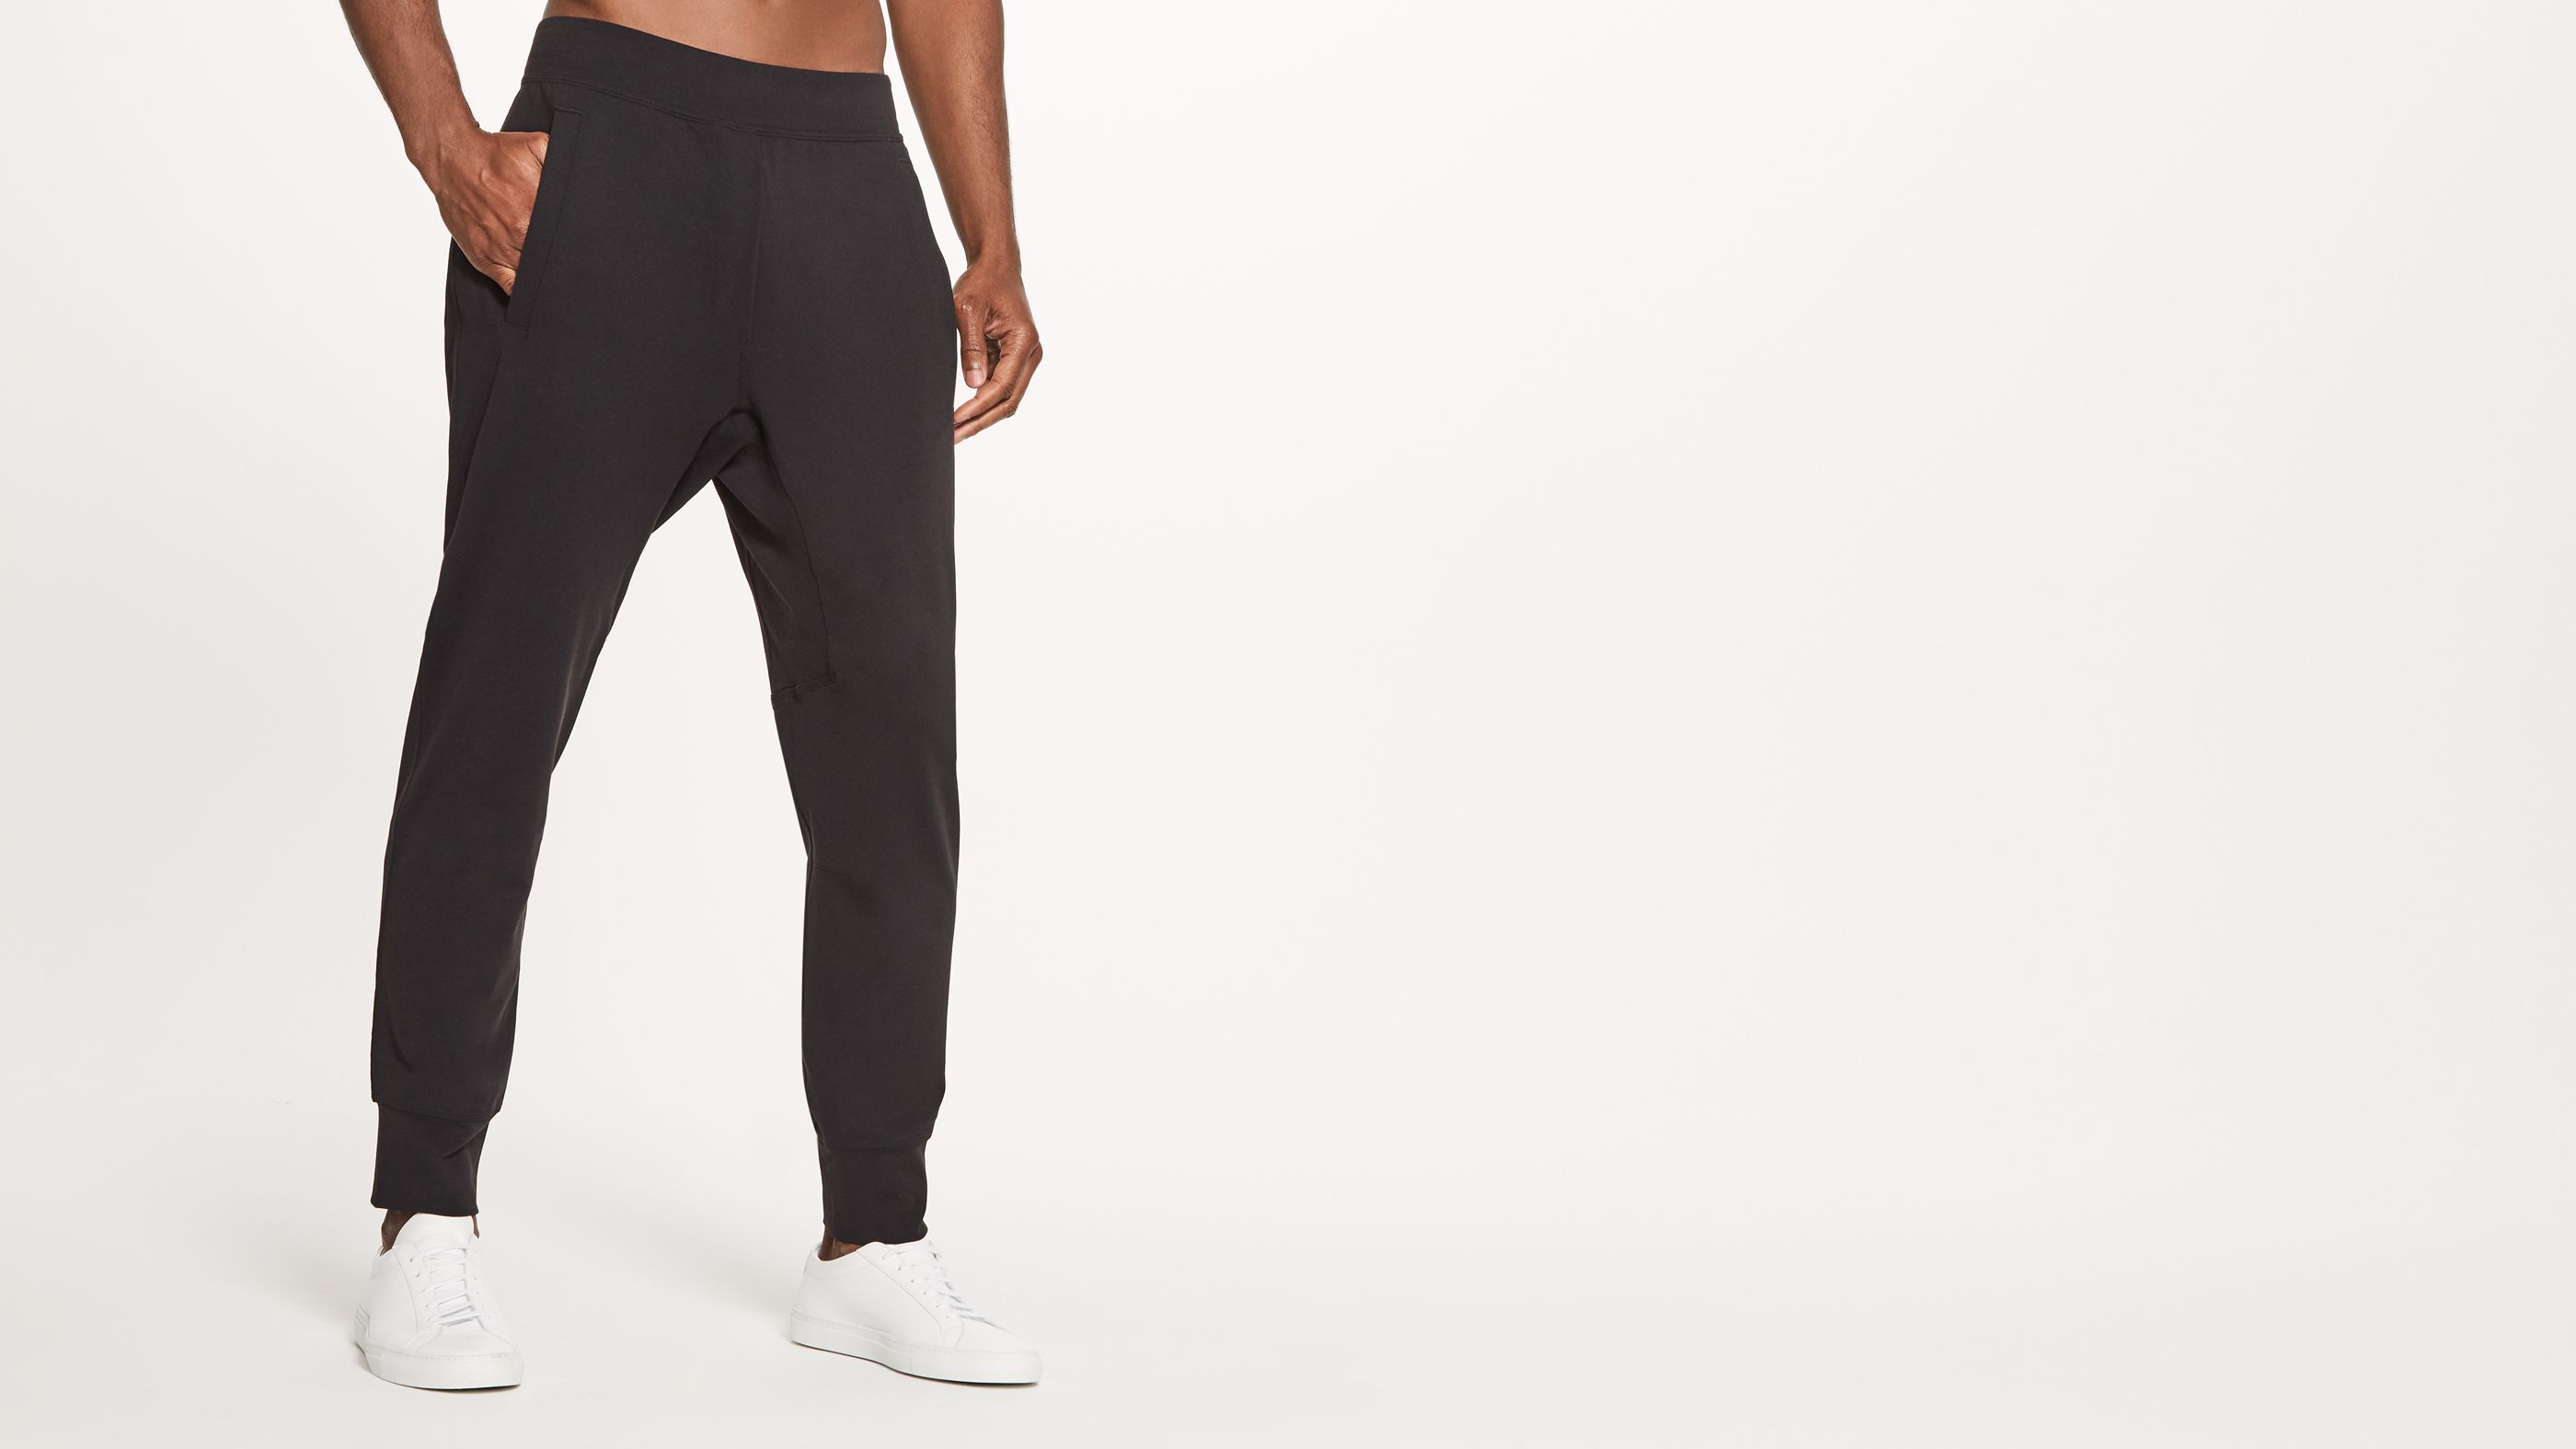 lululemon in mind pant review